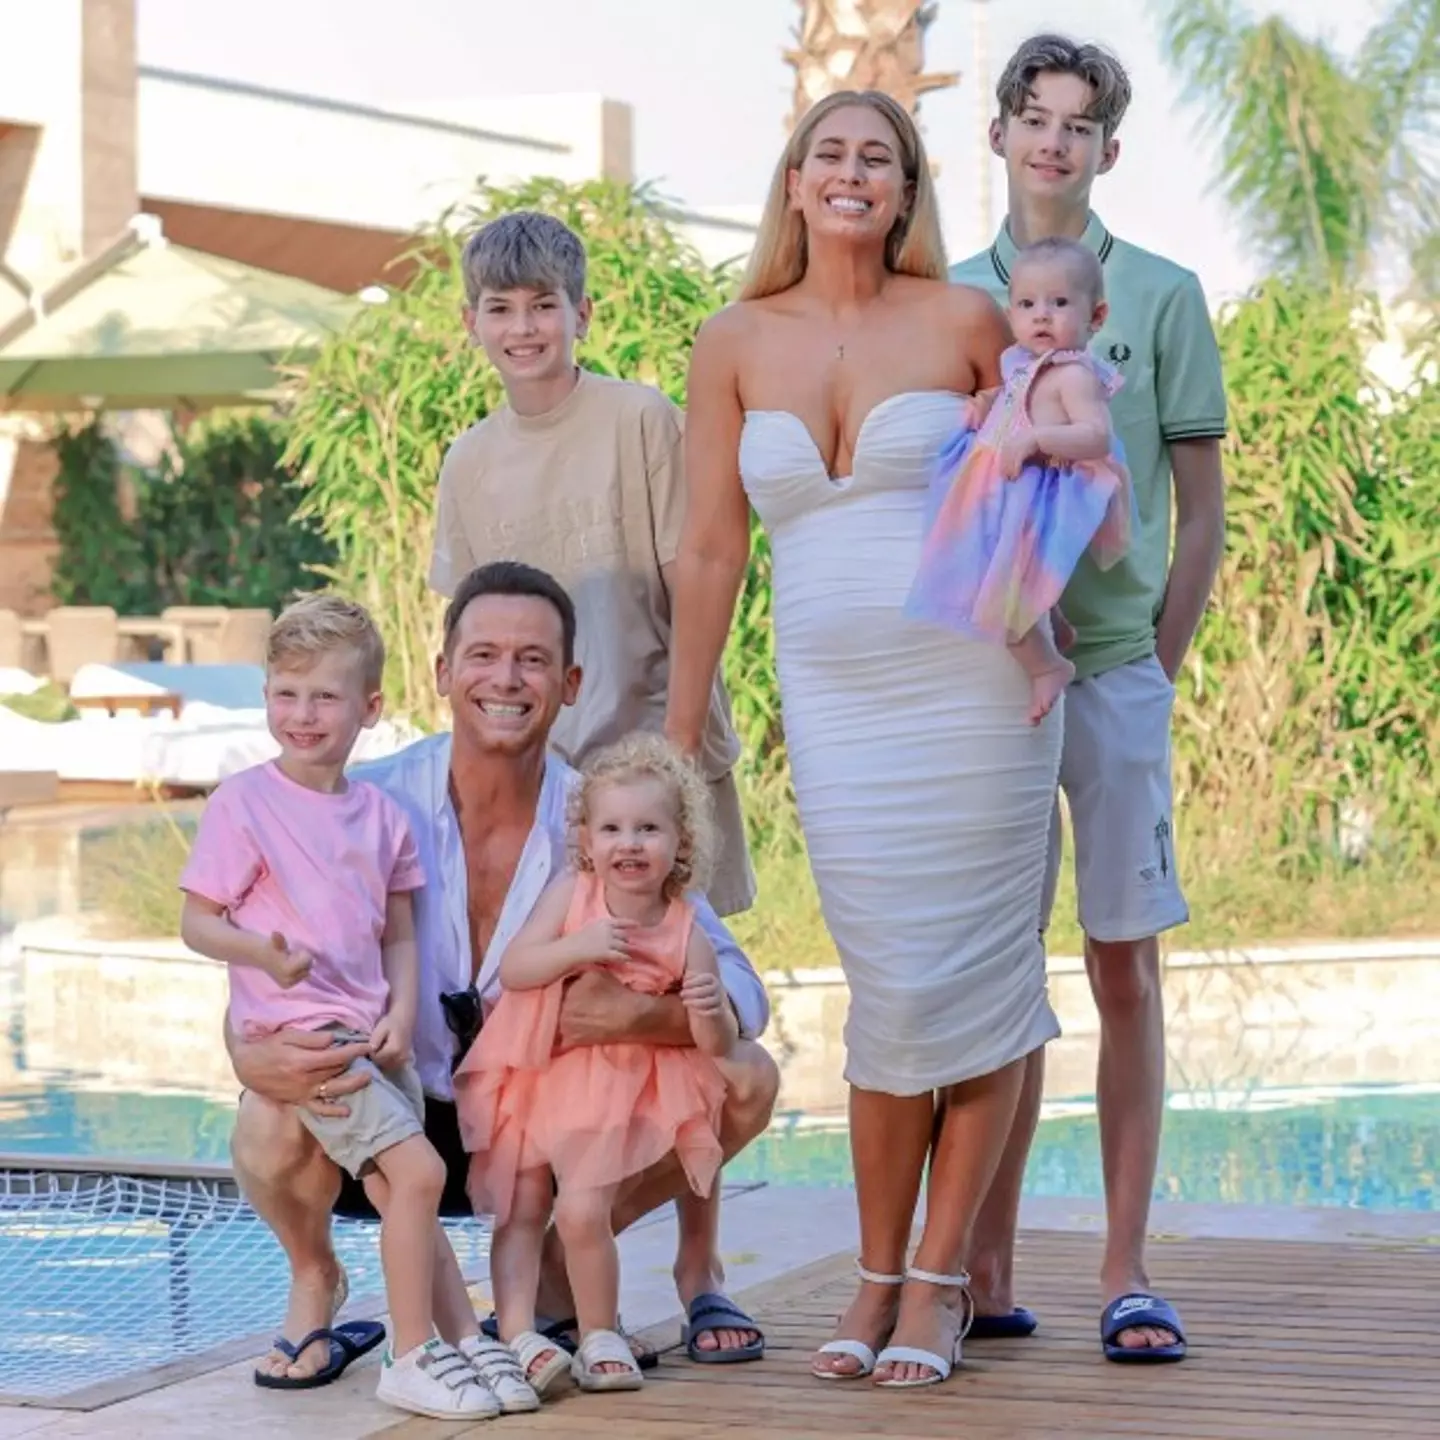 Taking to social media, the 33-year-old has shared holiday pics with her five kids, three of which she shares with Joe.